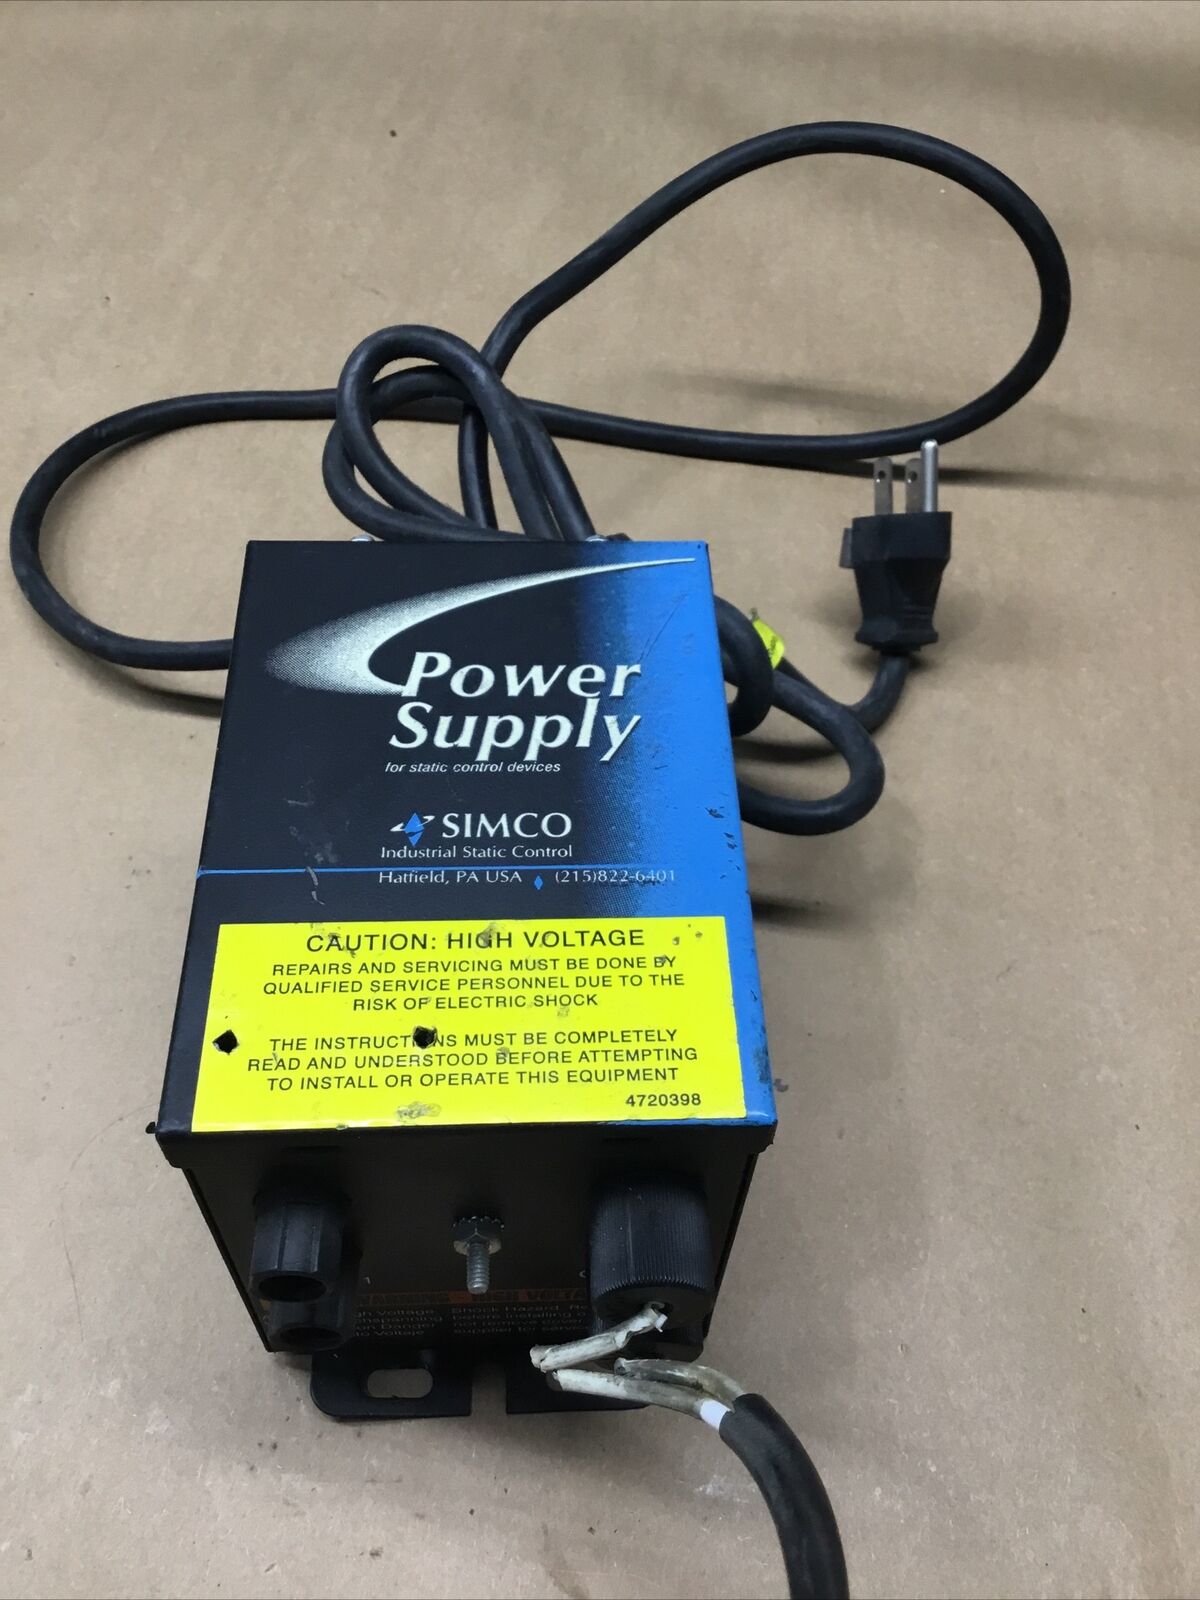 Simco G165 4002996 Industrial Static Control Power Supply 120VAC #704F60FML